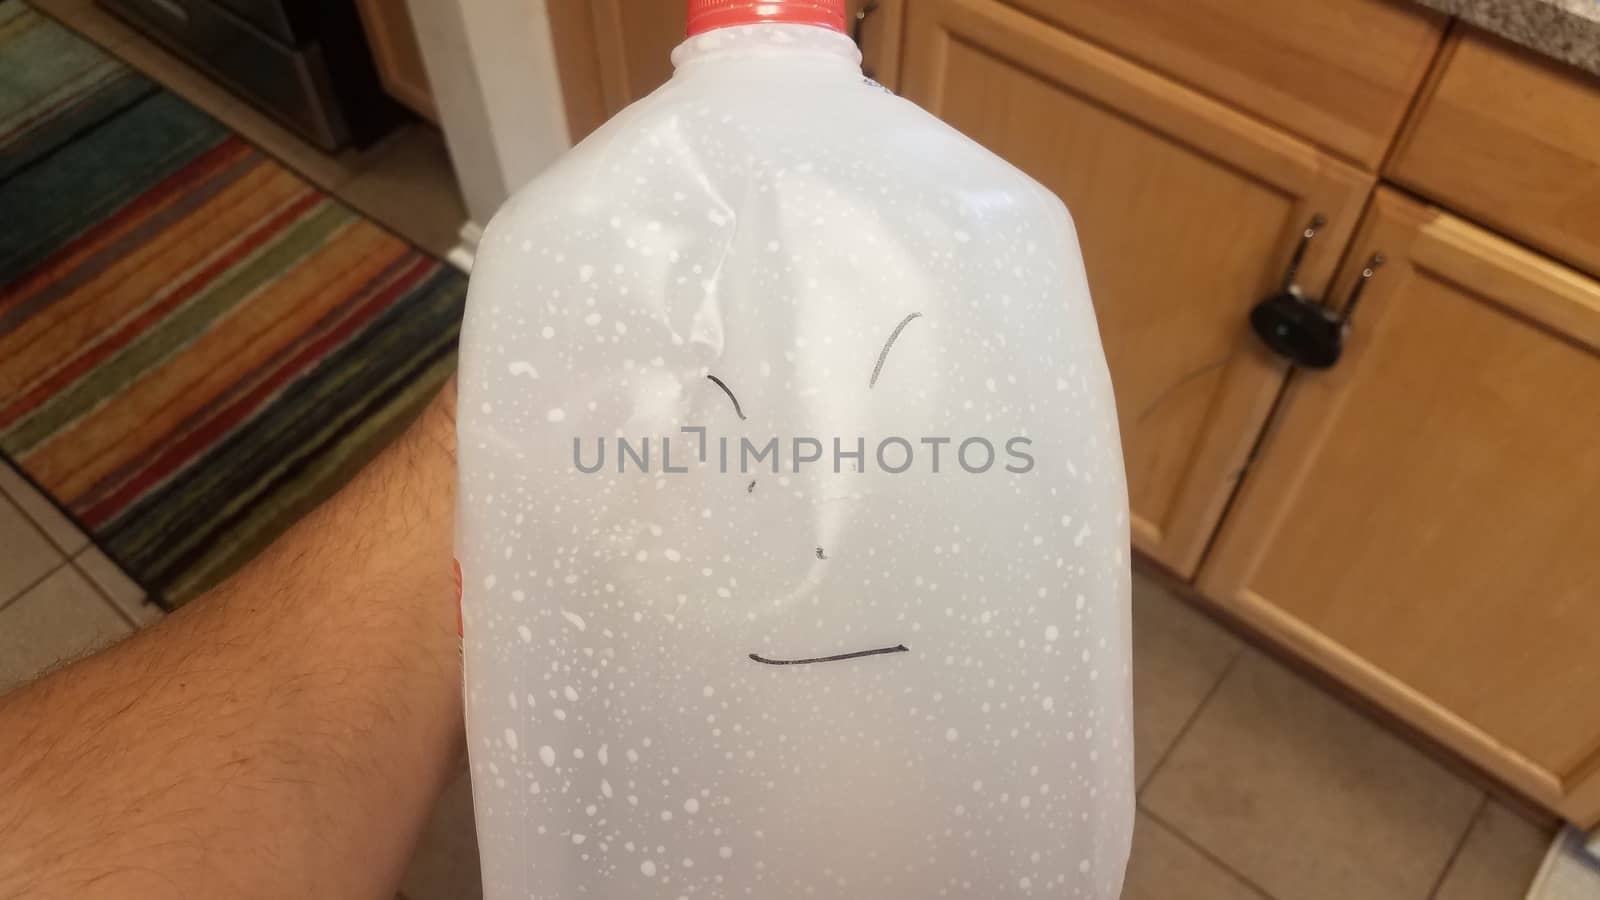 angry face drawn on empty milk gallon jug by stockphotofan1